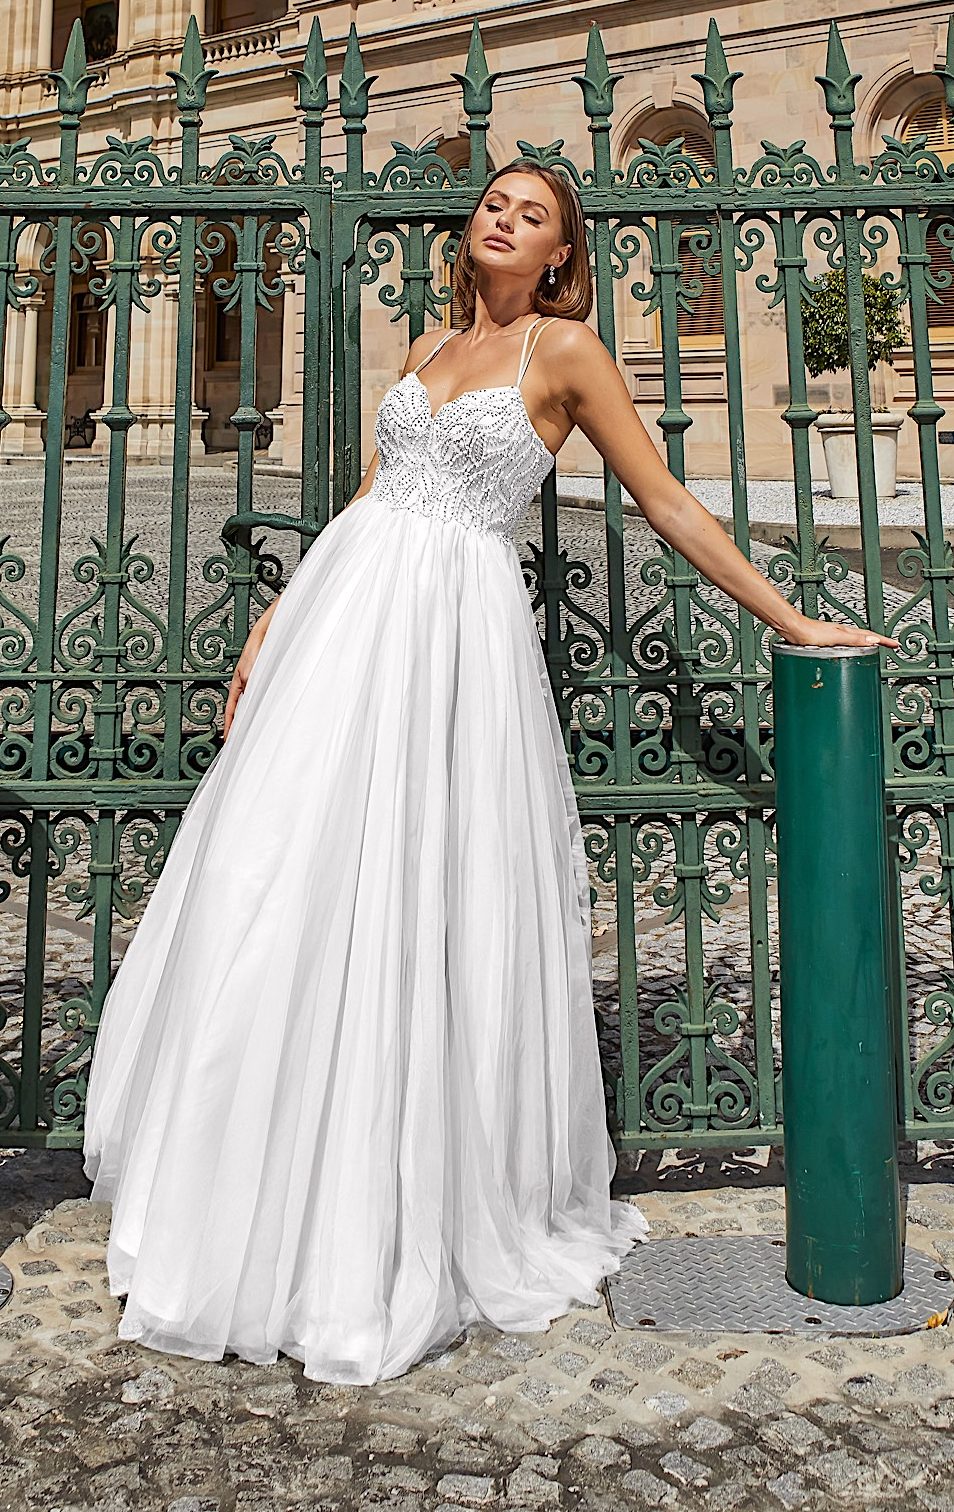 47 Wedding Dresses Under $1000 at The Gilded Gown #budgetbridalgowns | The  Gilded Gown